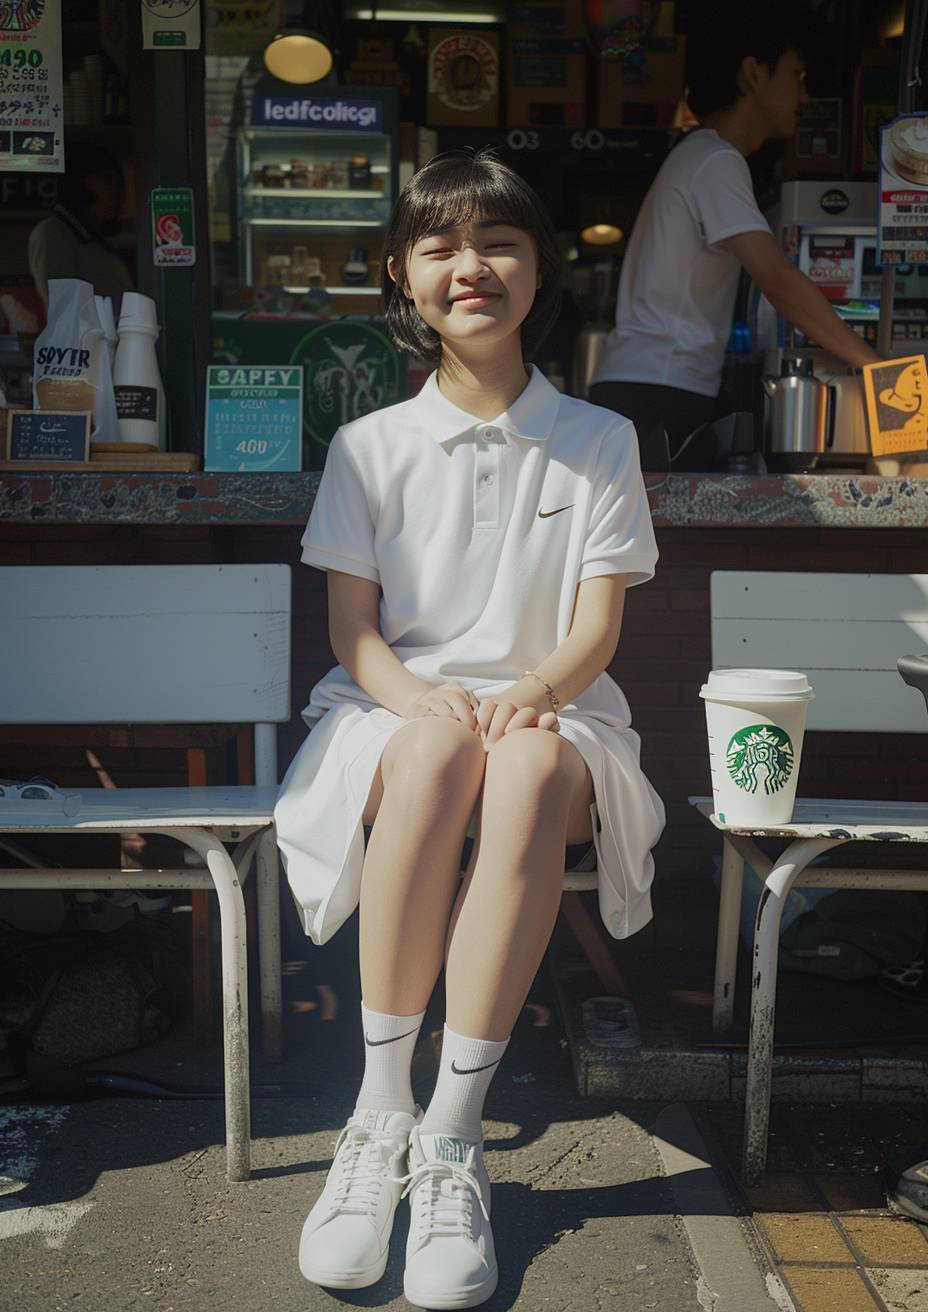 Masterpiece, epic pose, 4K, natural lighting, Rembrandt lighting | 15-year-old cute Japanese girl, groomed straight short black hair, gentle smile, crossed legs, sunlight stabbing at her feet | wearing sporty fashion, white plain polo long sporty dress with Nike's logo mark and Nike's sneakers, Starbucks cup of coffee by her side on the seat | sitting on a seat in front of a café stand, NYC, summer day, noon, Dutch angle shot with Sony a7R IV, Fujicolor Superia X-TRA 400 film simulation - no logo mark, logo type, text, signboard, monochrome, retro - AR 5:7 - raw style - stylize 120 - v 6.0